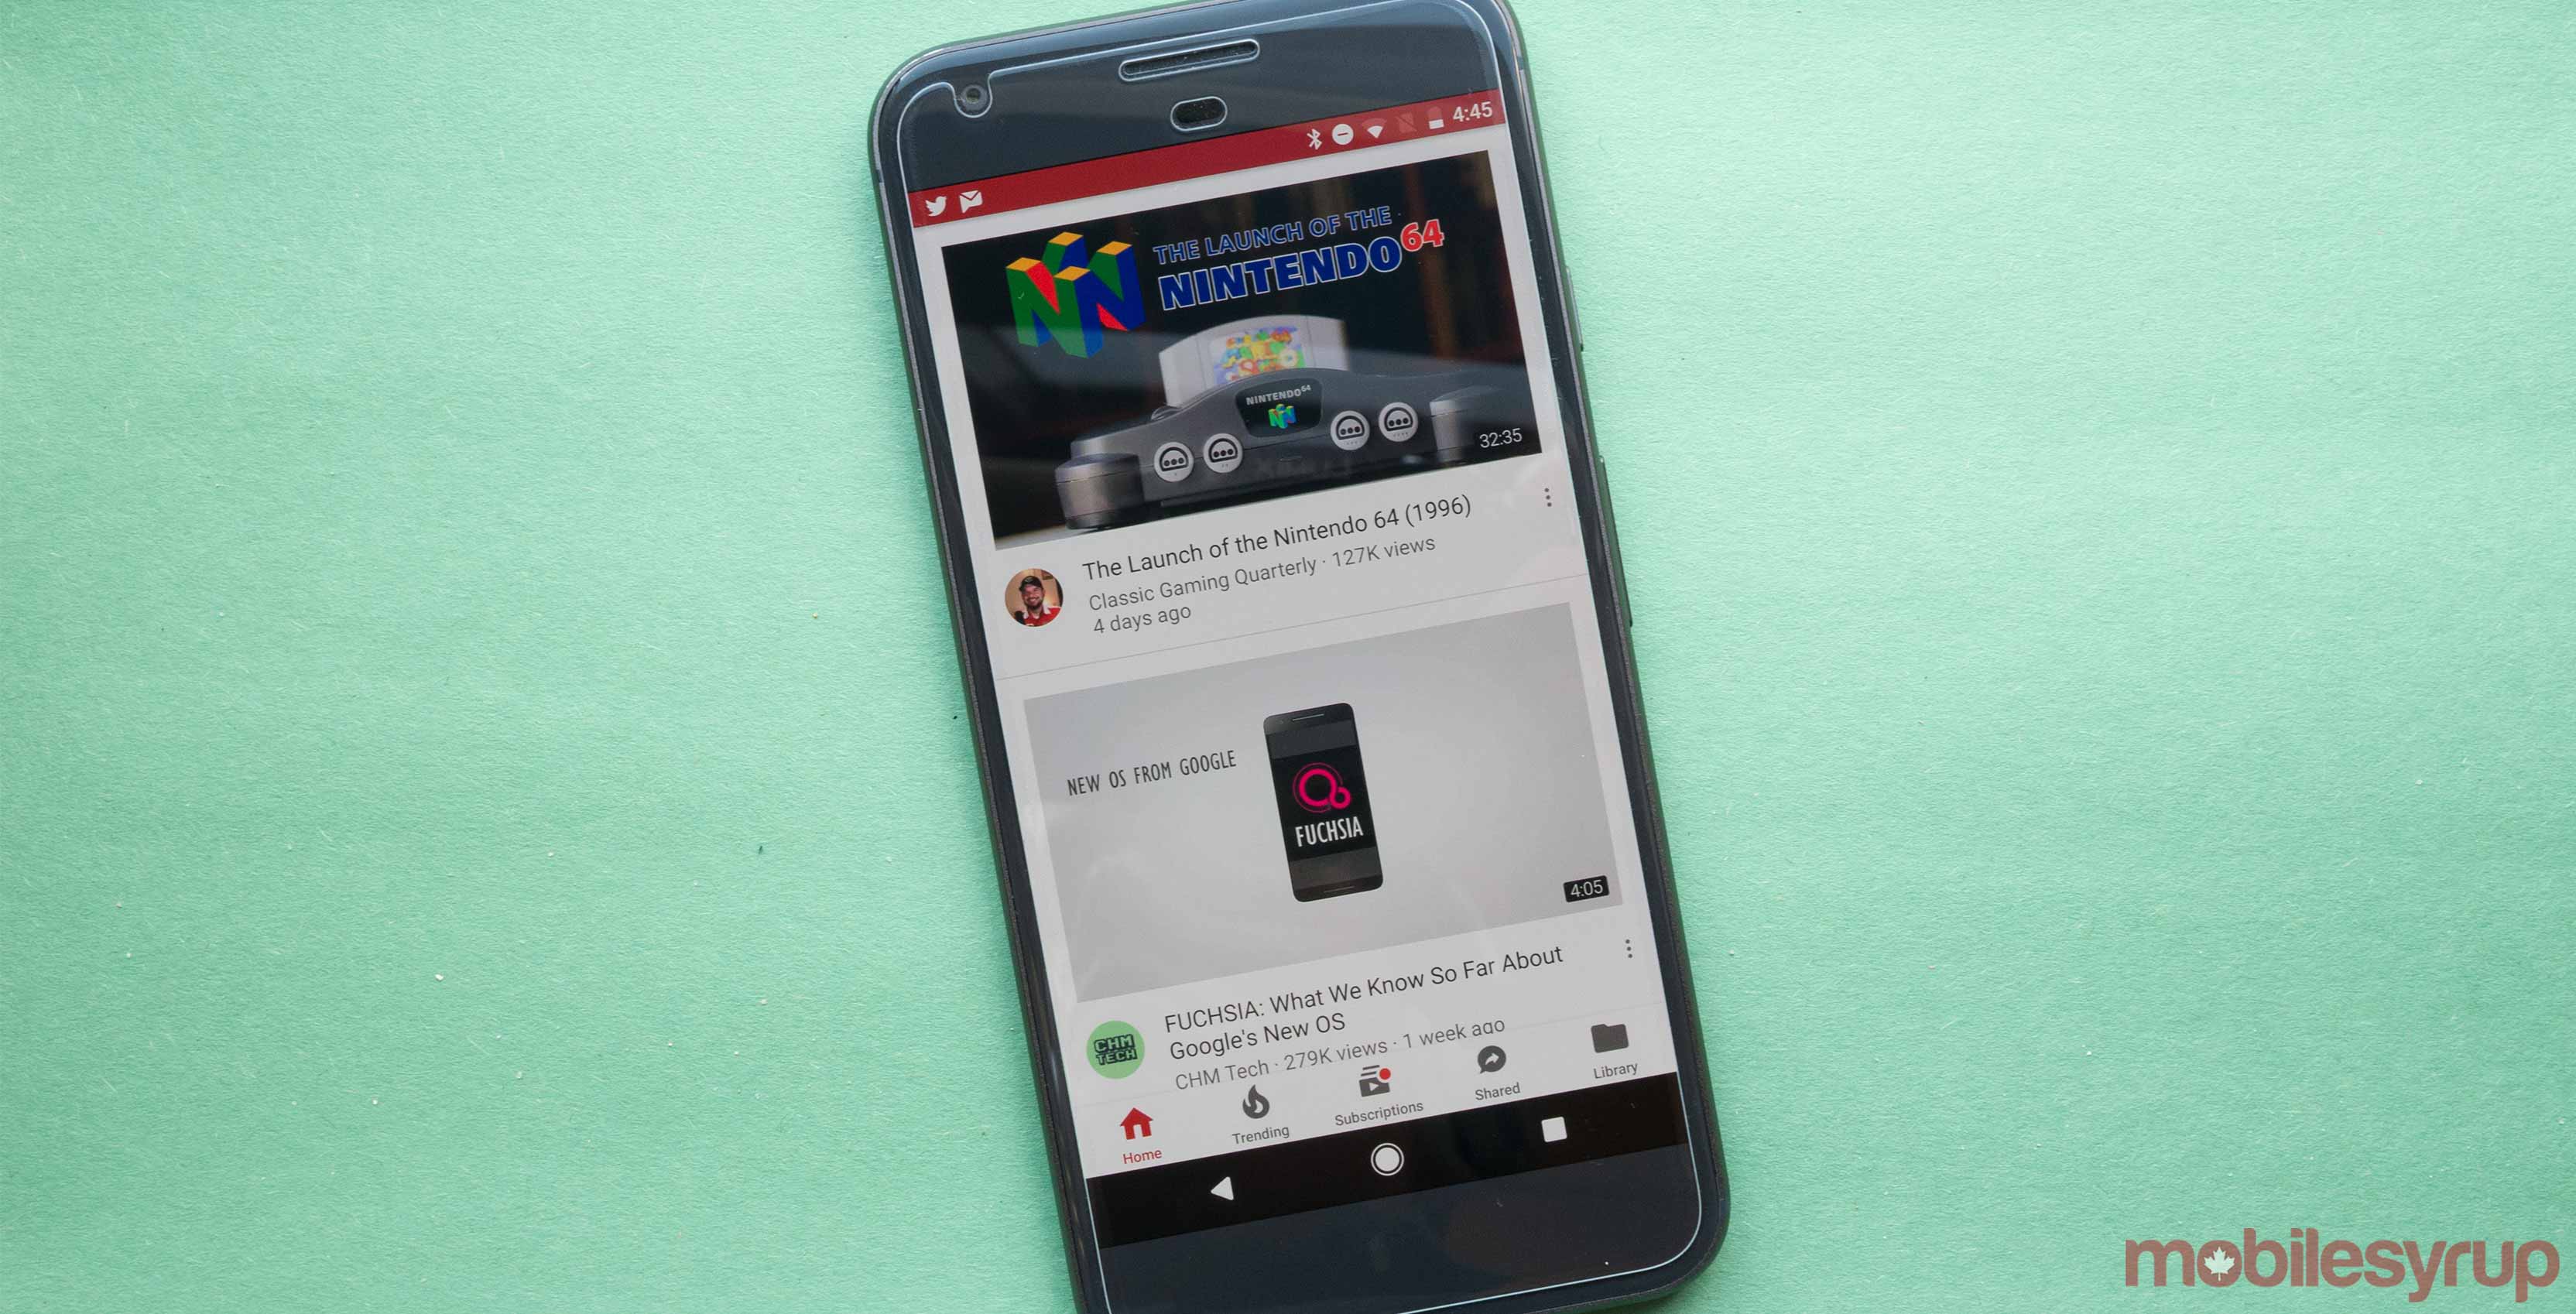 New Youtube app on Android